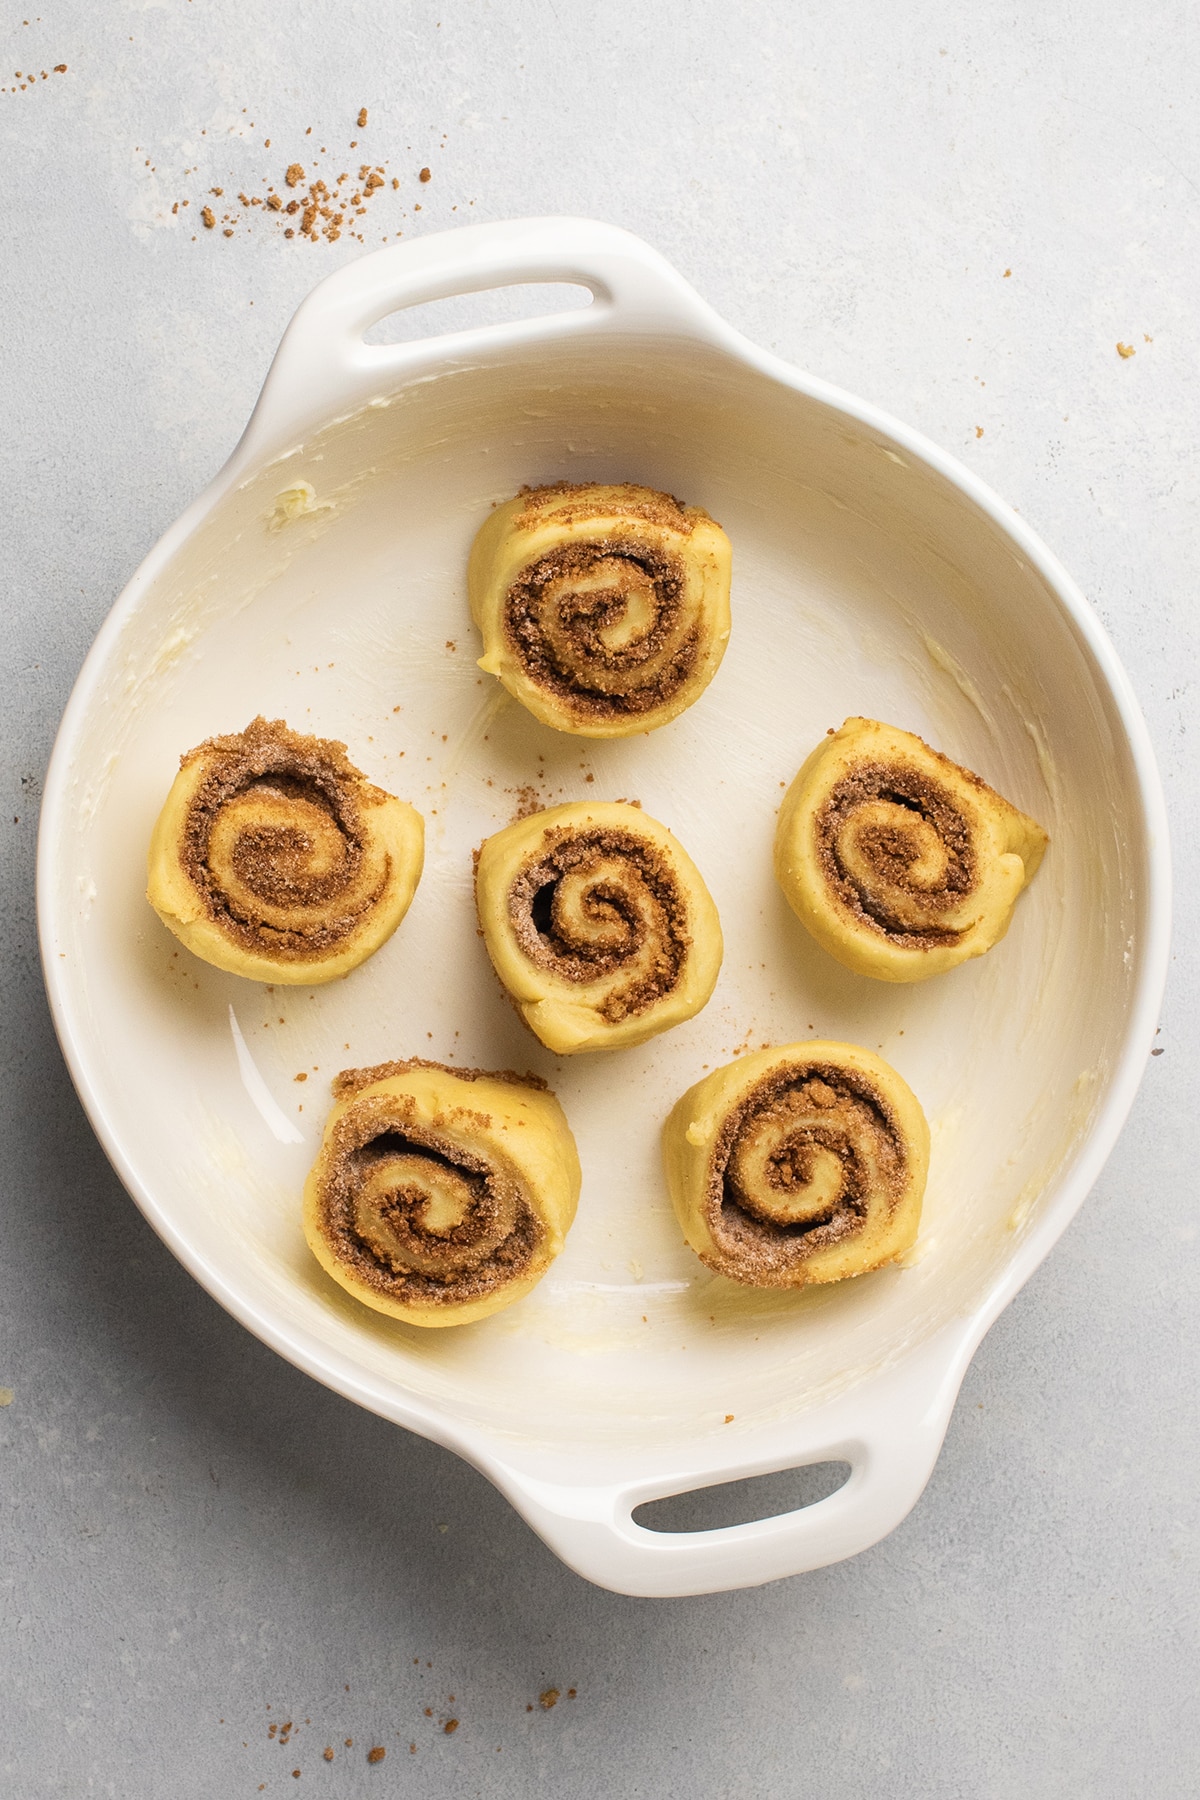 Six cinnamon rolls in a white dish before baking.